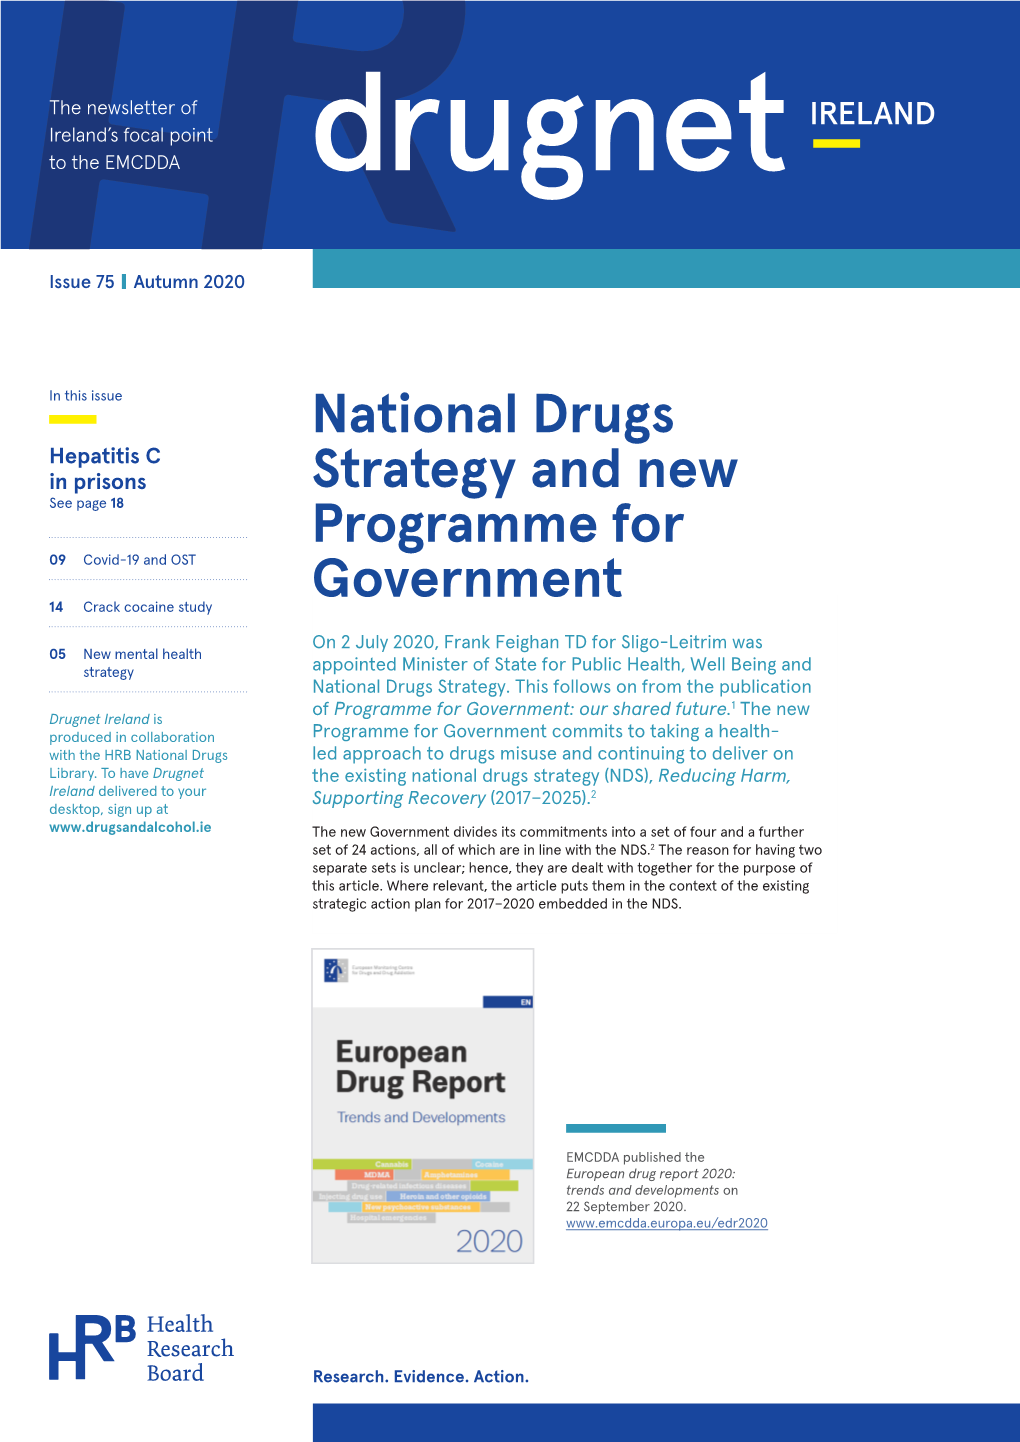 National Drugs Strategy and New Programme for Government